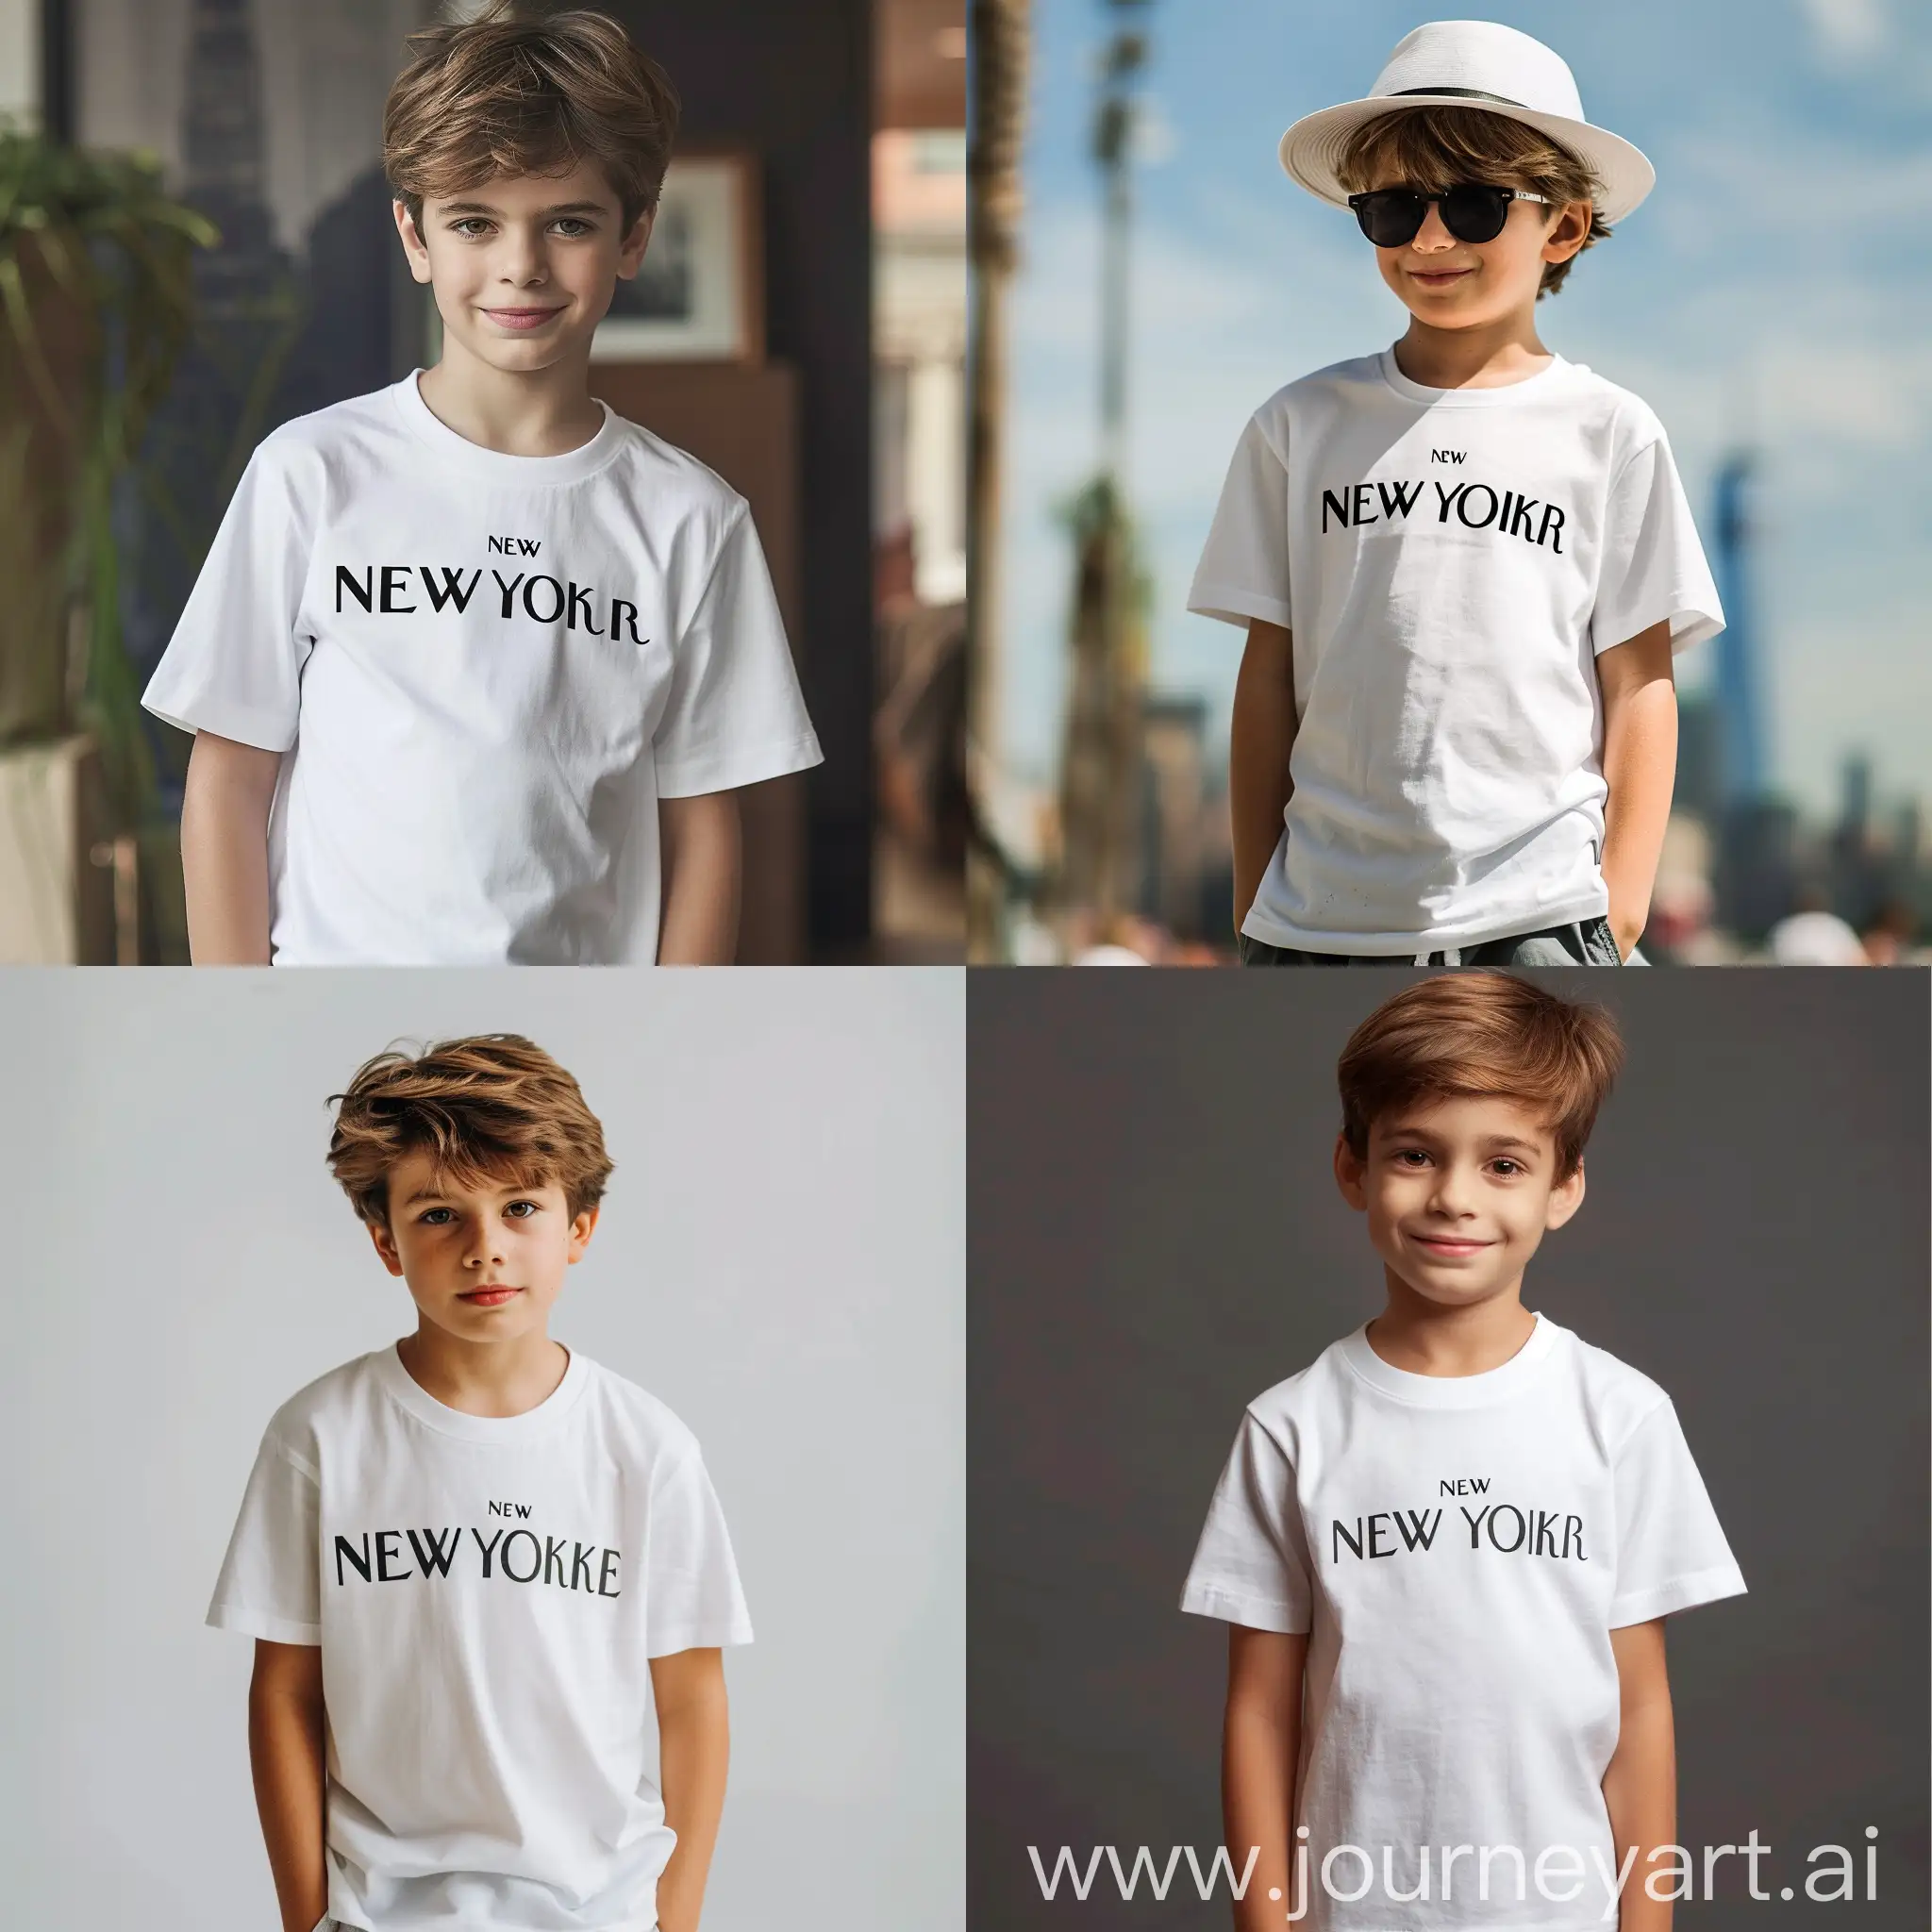 Urban-Style-Young-Boy-in-New-Yorker-Tshirt